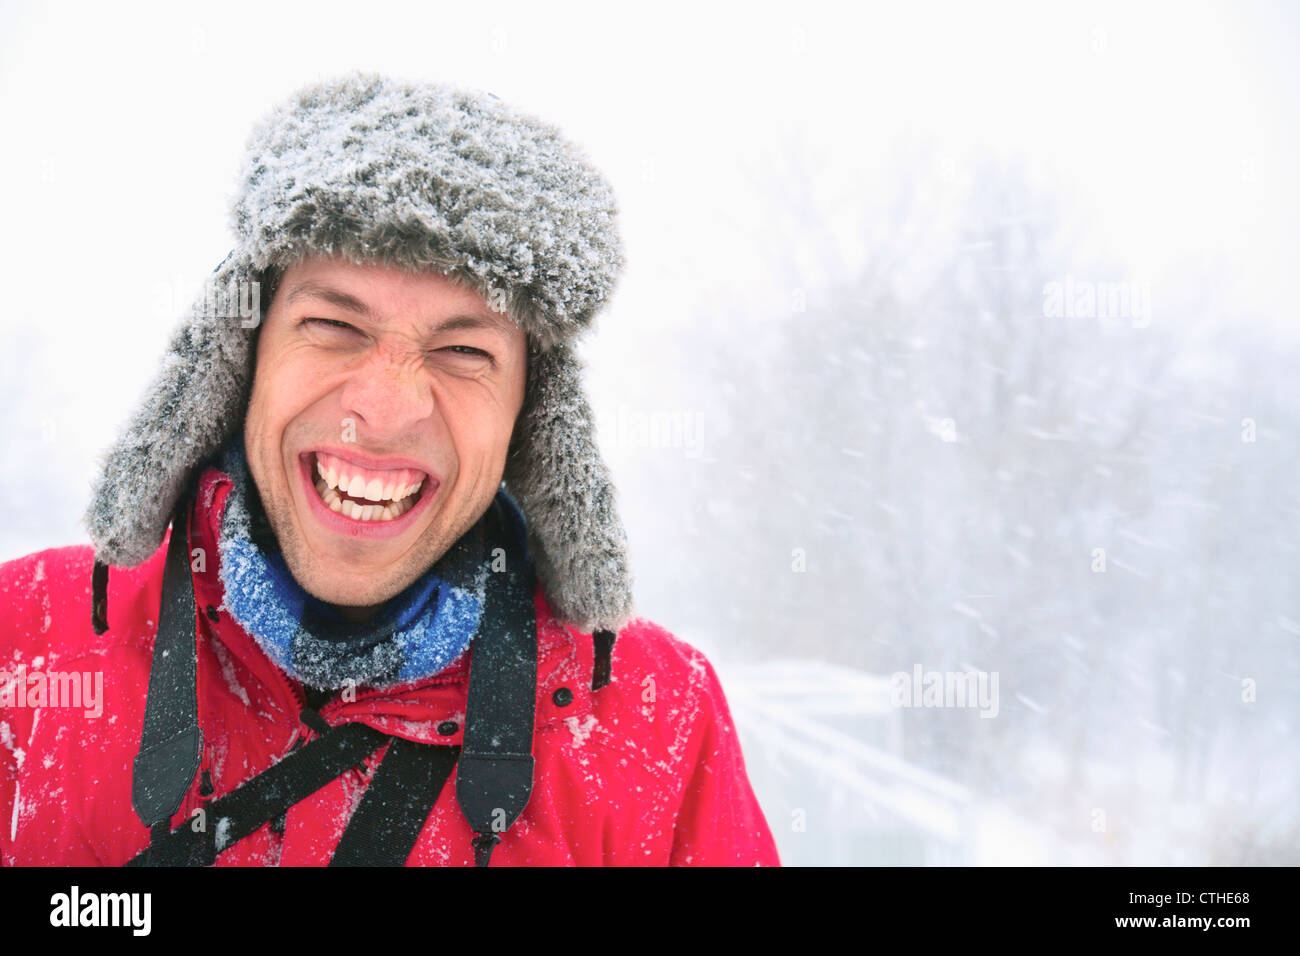 A Young Man Laughing A He Wears A Fur Hat Covered In Snow On A Snowy Day; Eagan, Minnesota, United States of America Stock Photo